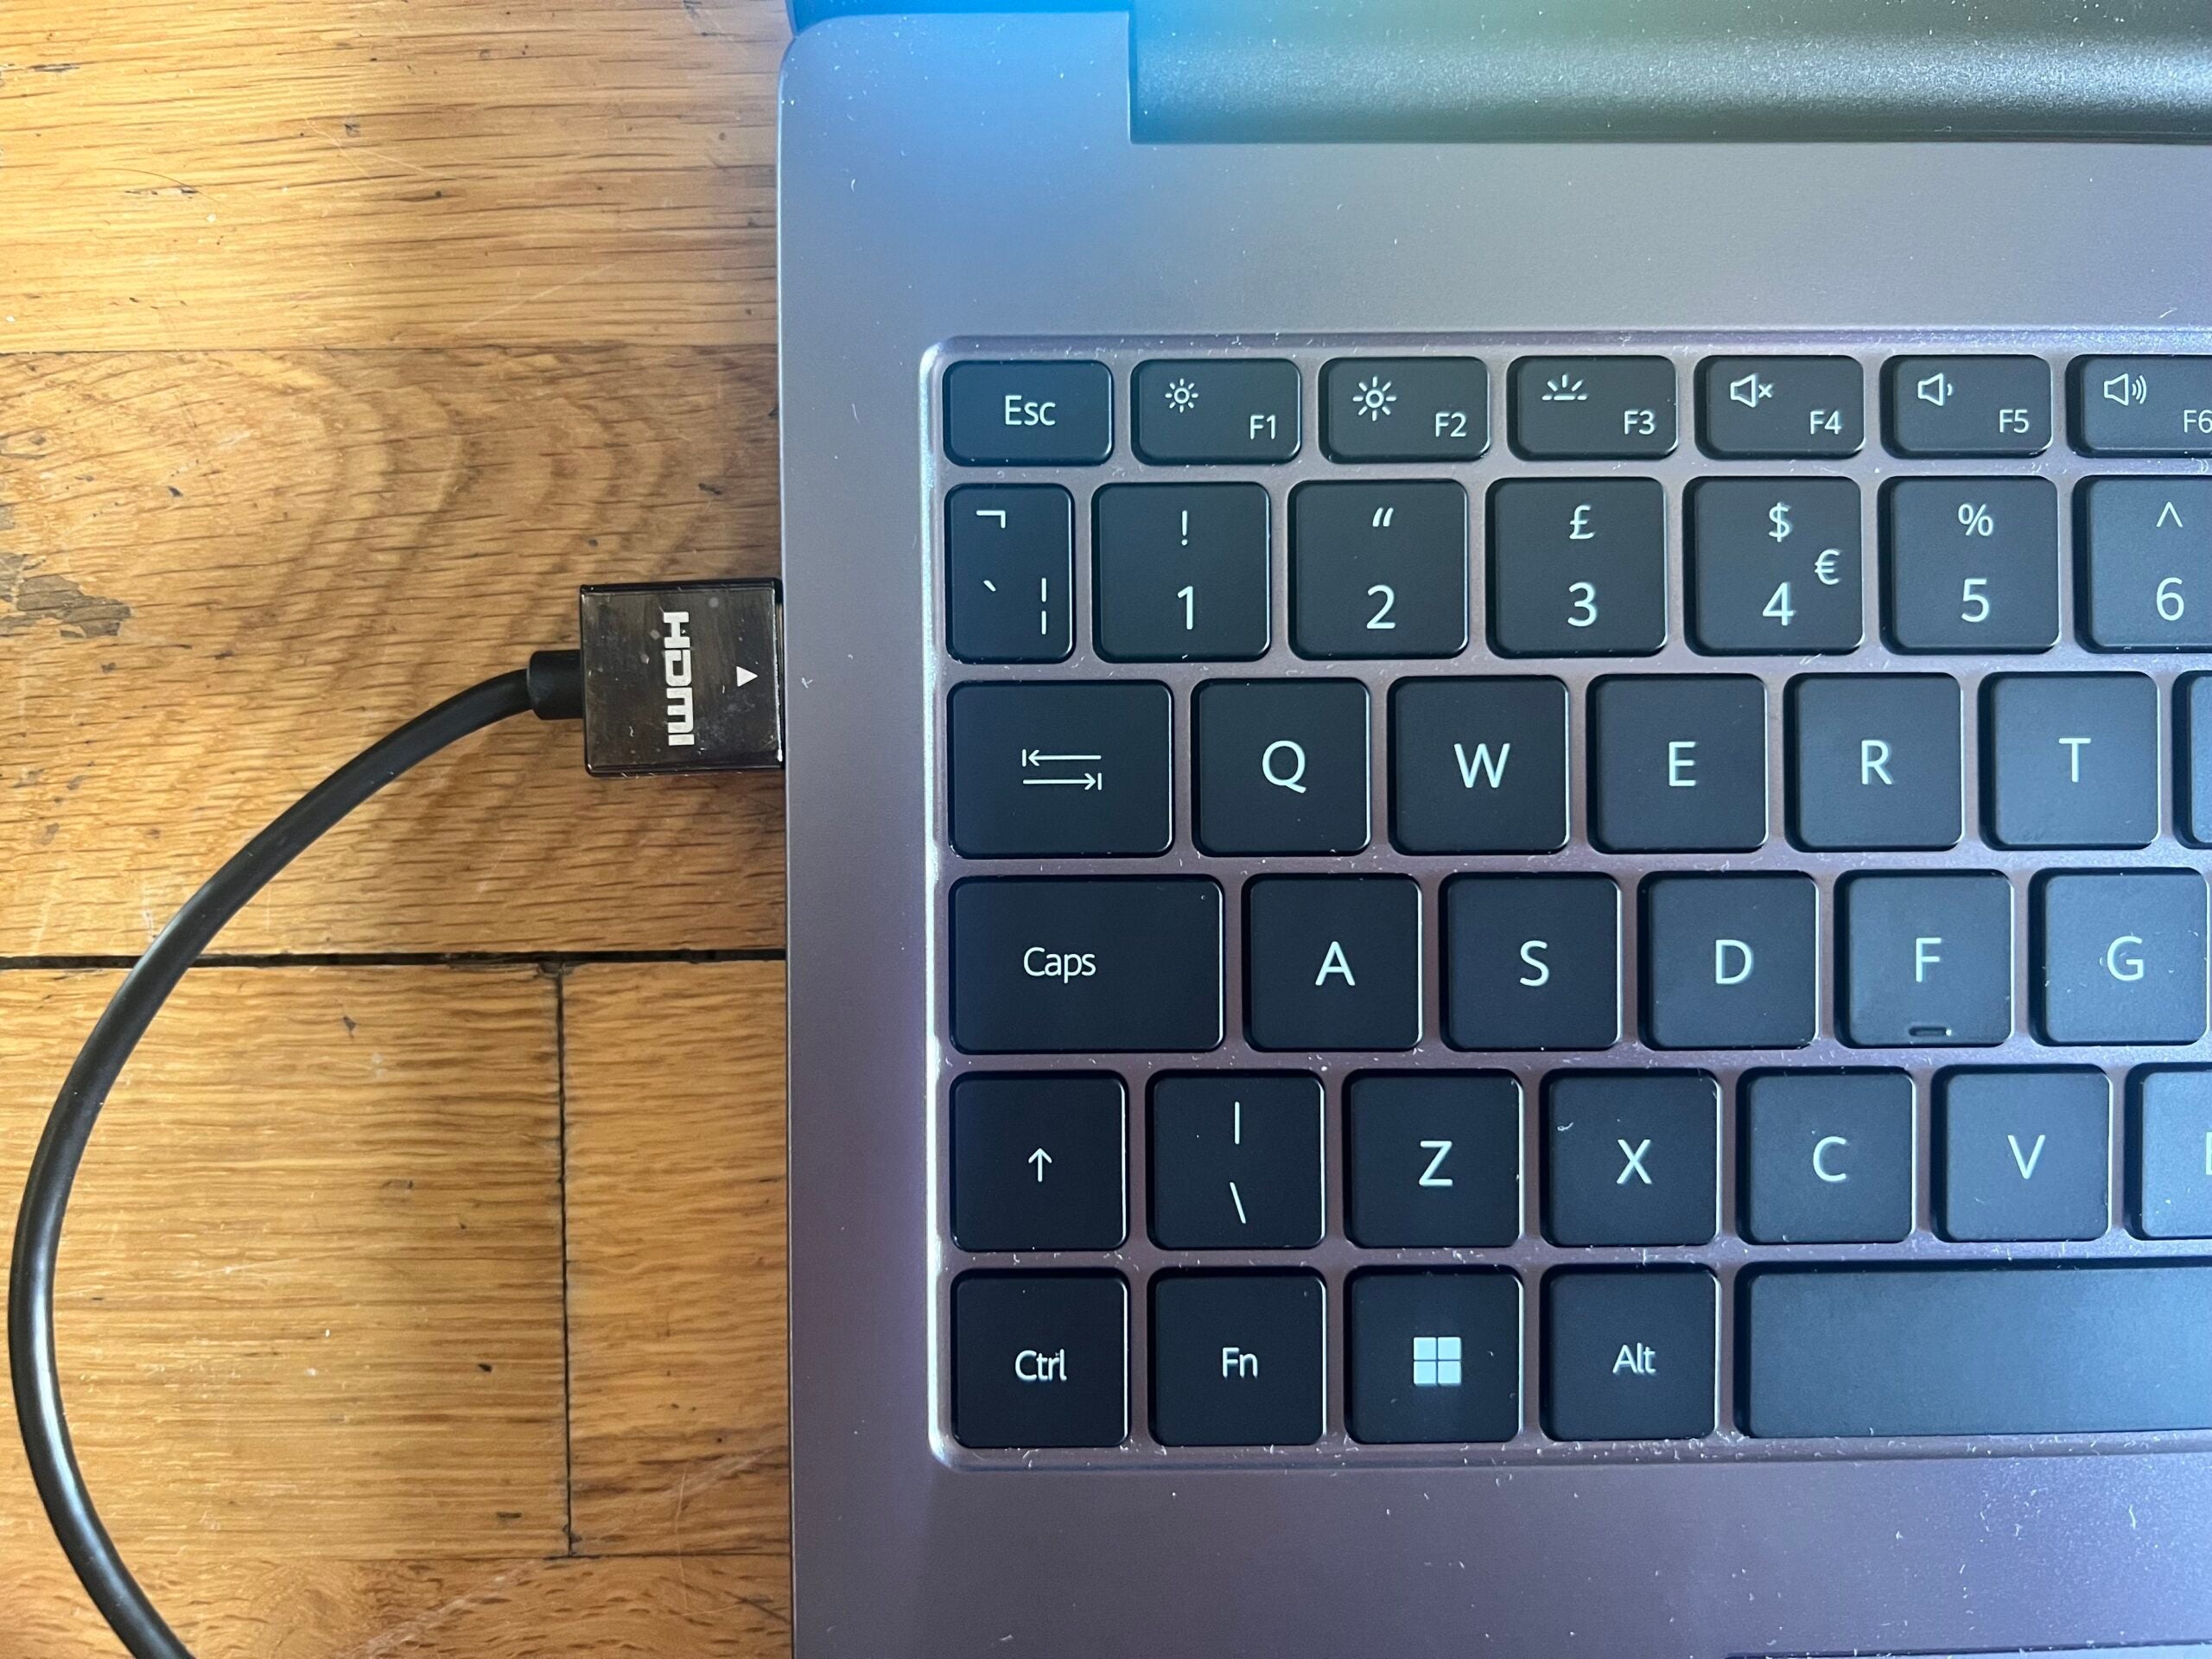 Connect HDMI to laptop